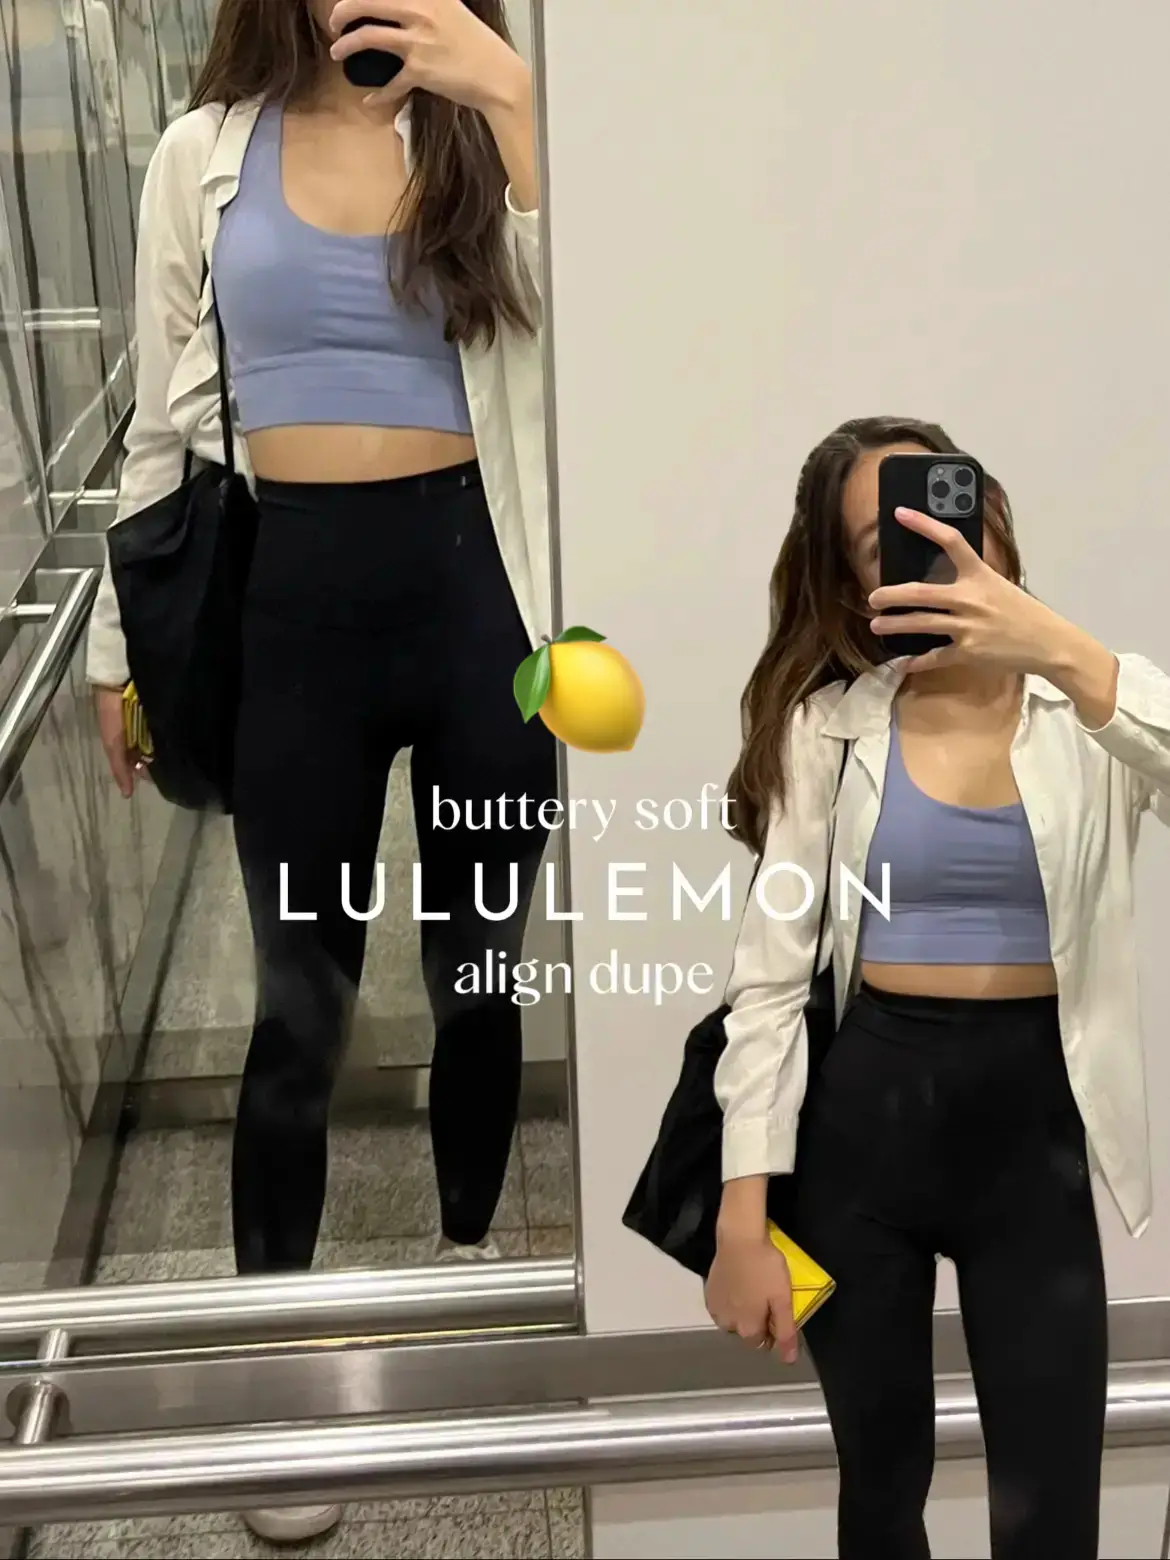 🍋 lululemon align dupe for $28⁉️, Gallery posted by GS 🍓